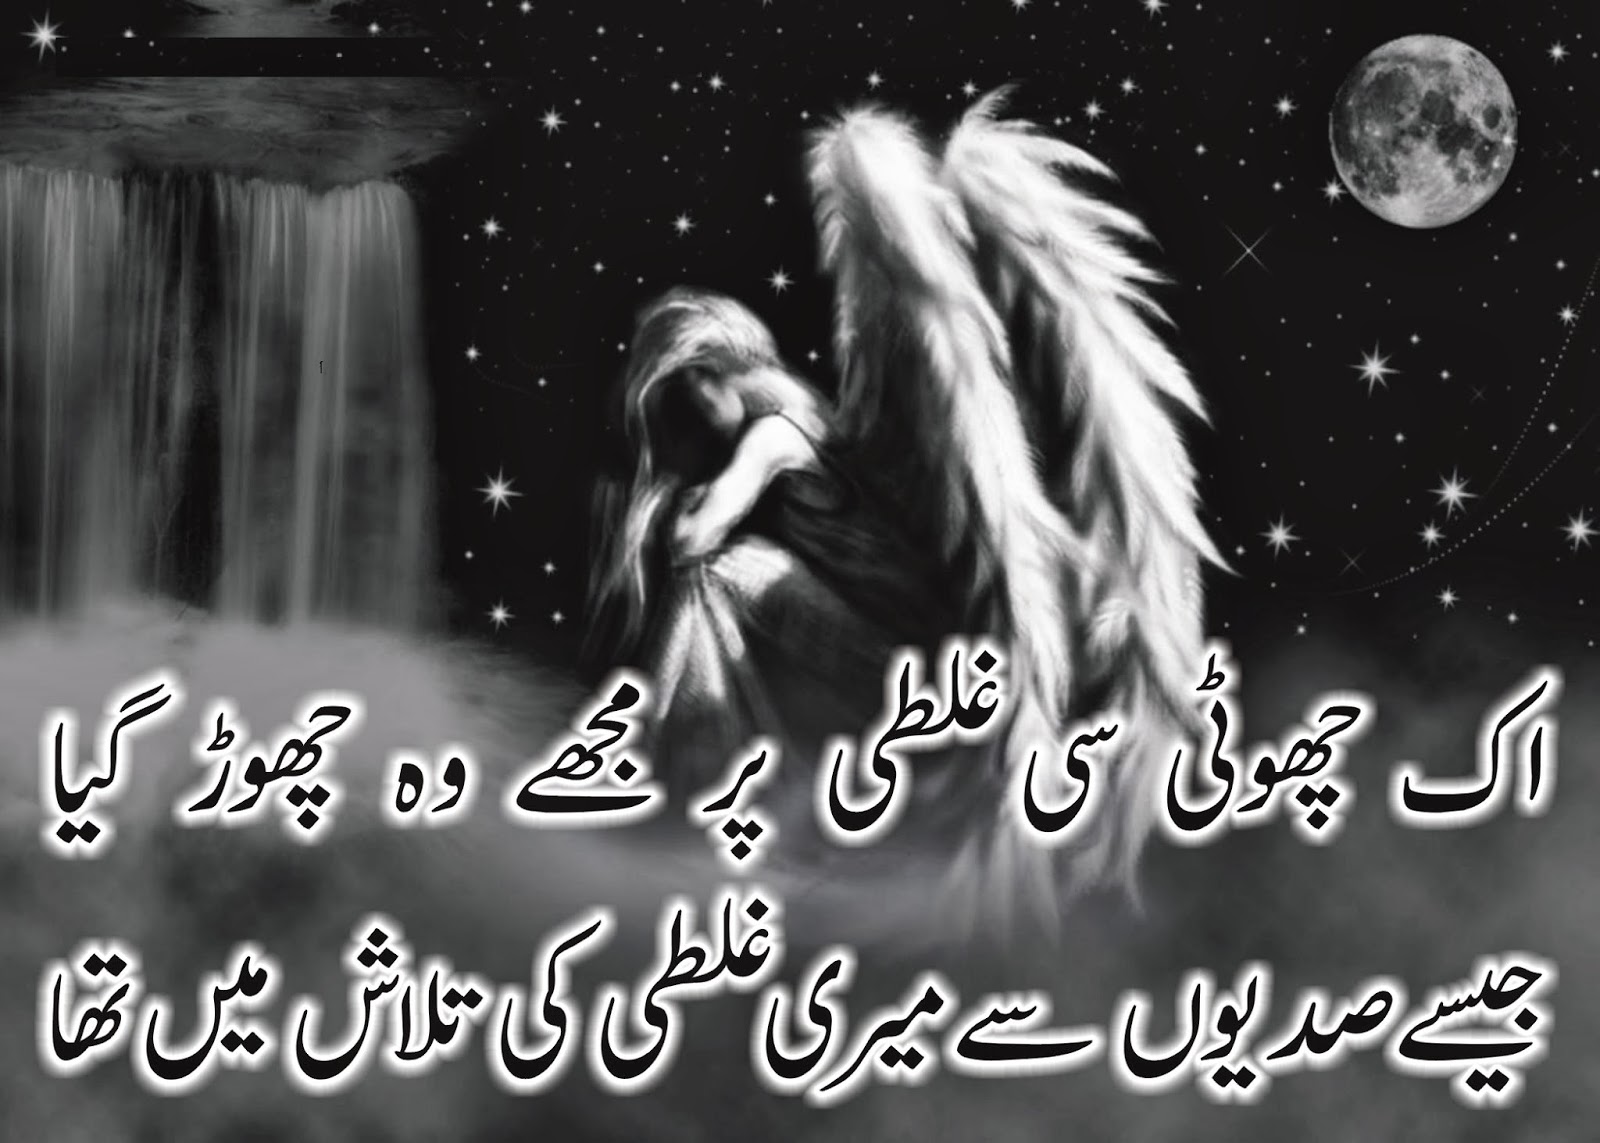 Famous Sad Poetry Sad Poetry In Urdu For Girls Pics In English For Boys SMS Punjabi Wallpapers For Boys In Urdu